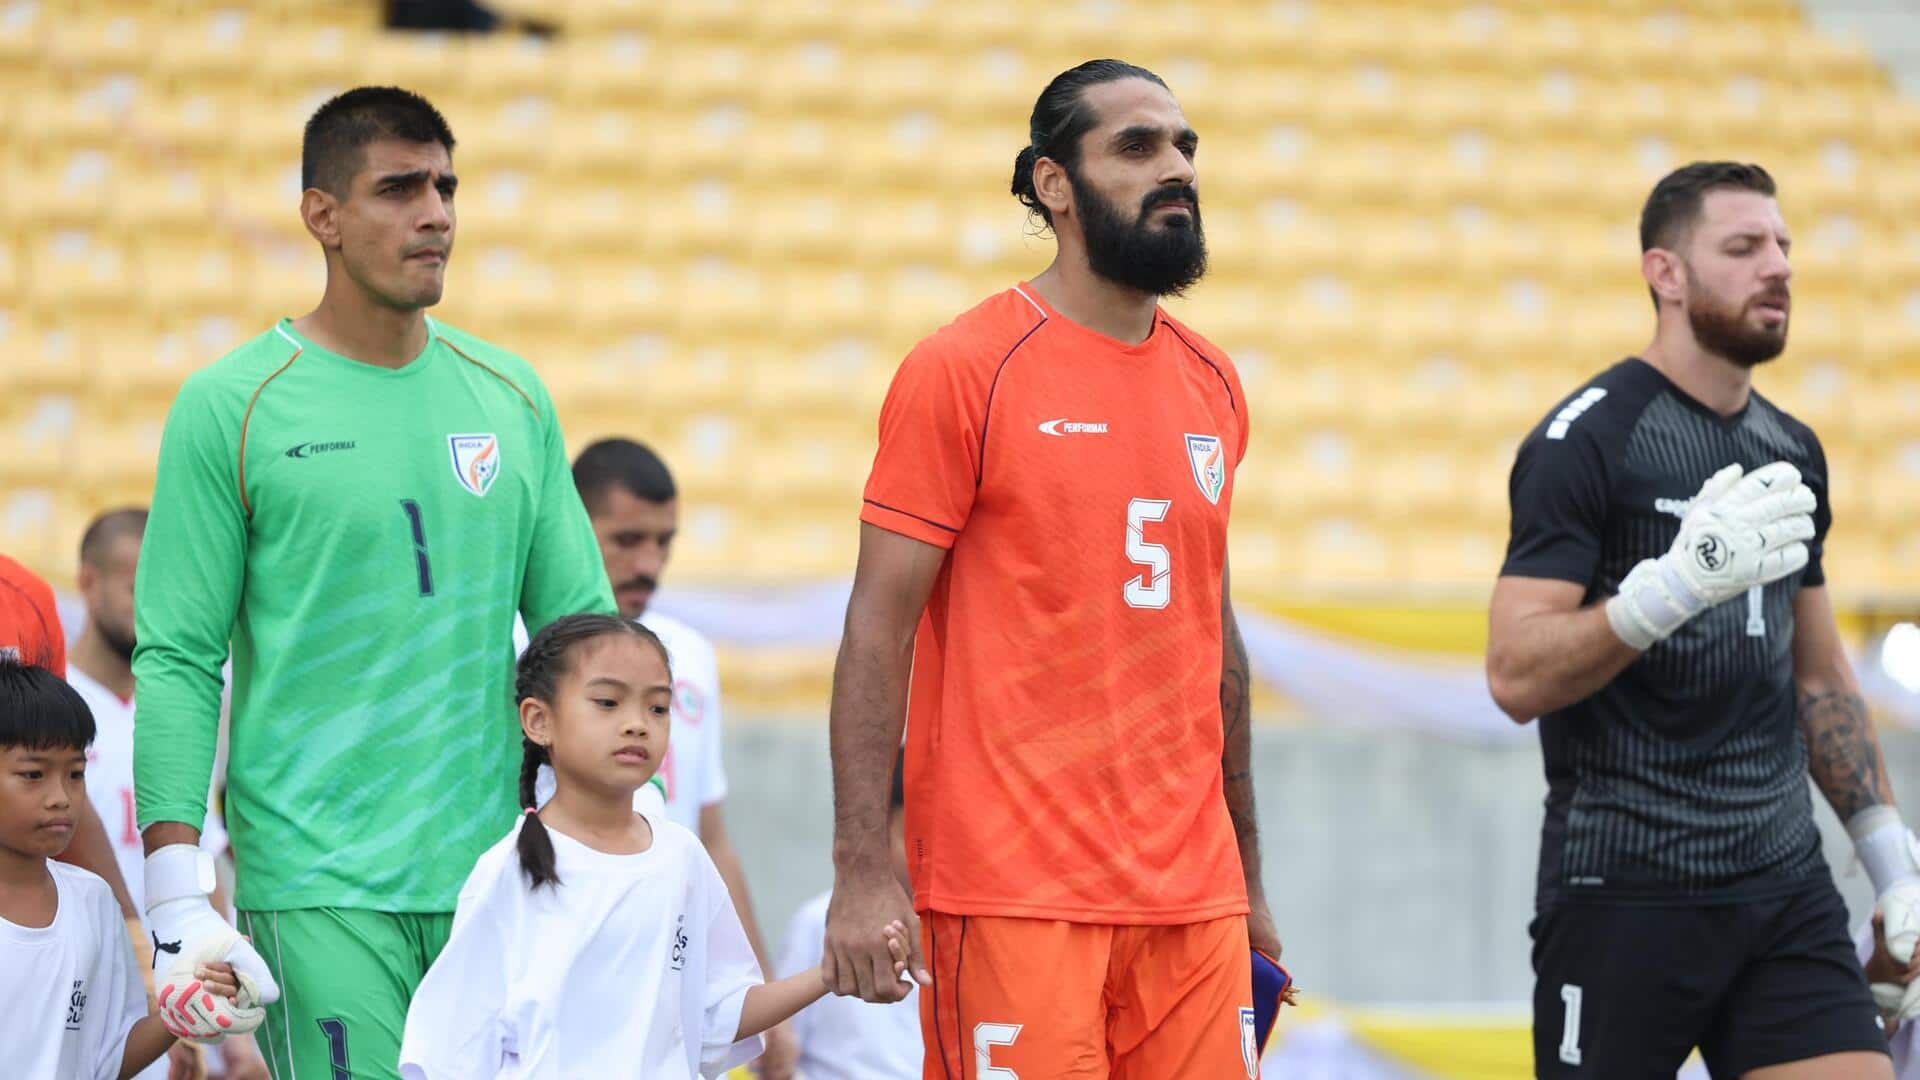 Merdeka Cup: India to face Malaysia in a knock-out clash